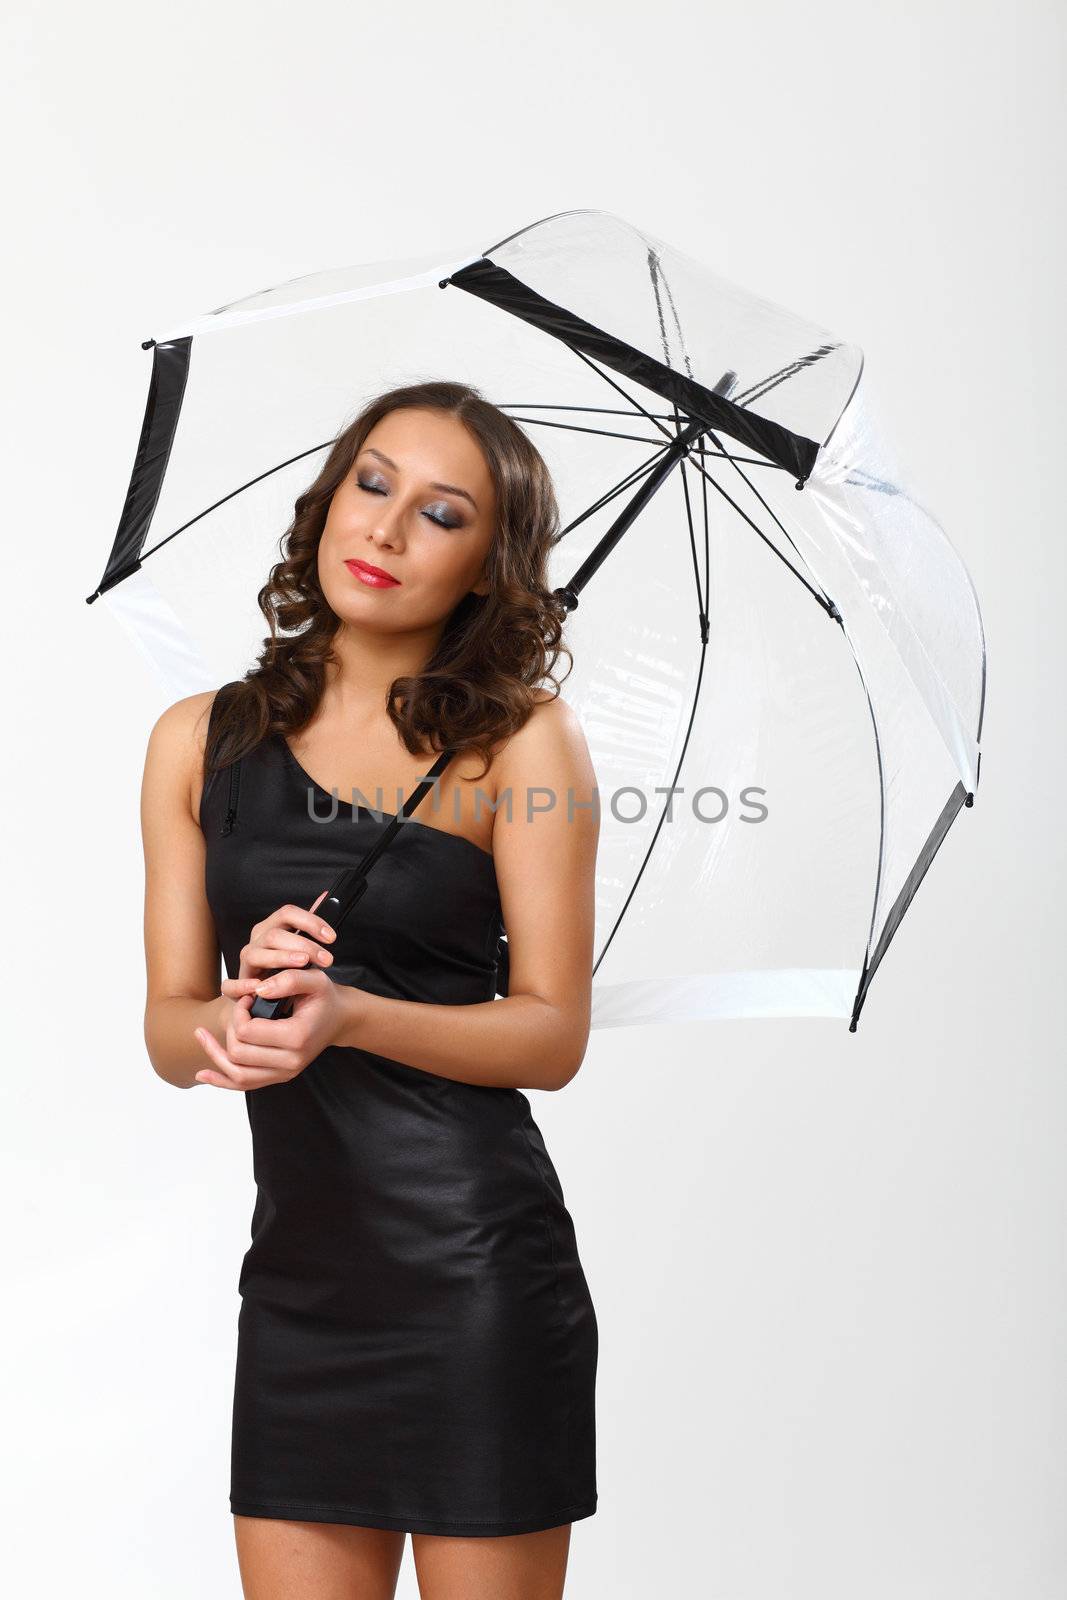 Portrait of young woman with umbrella in studio